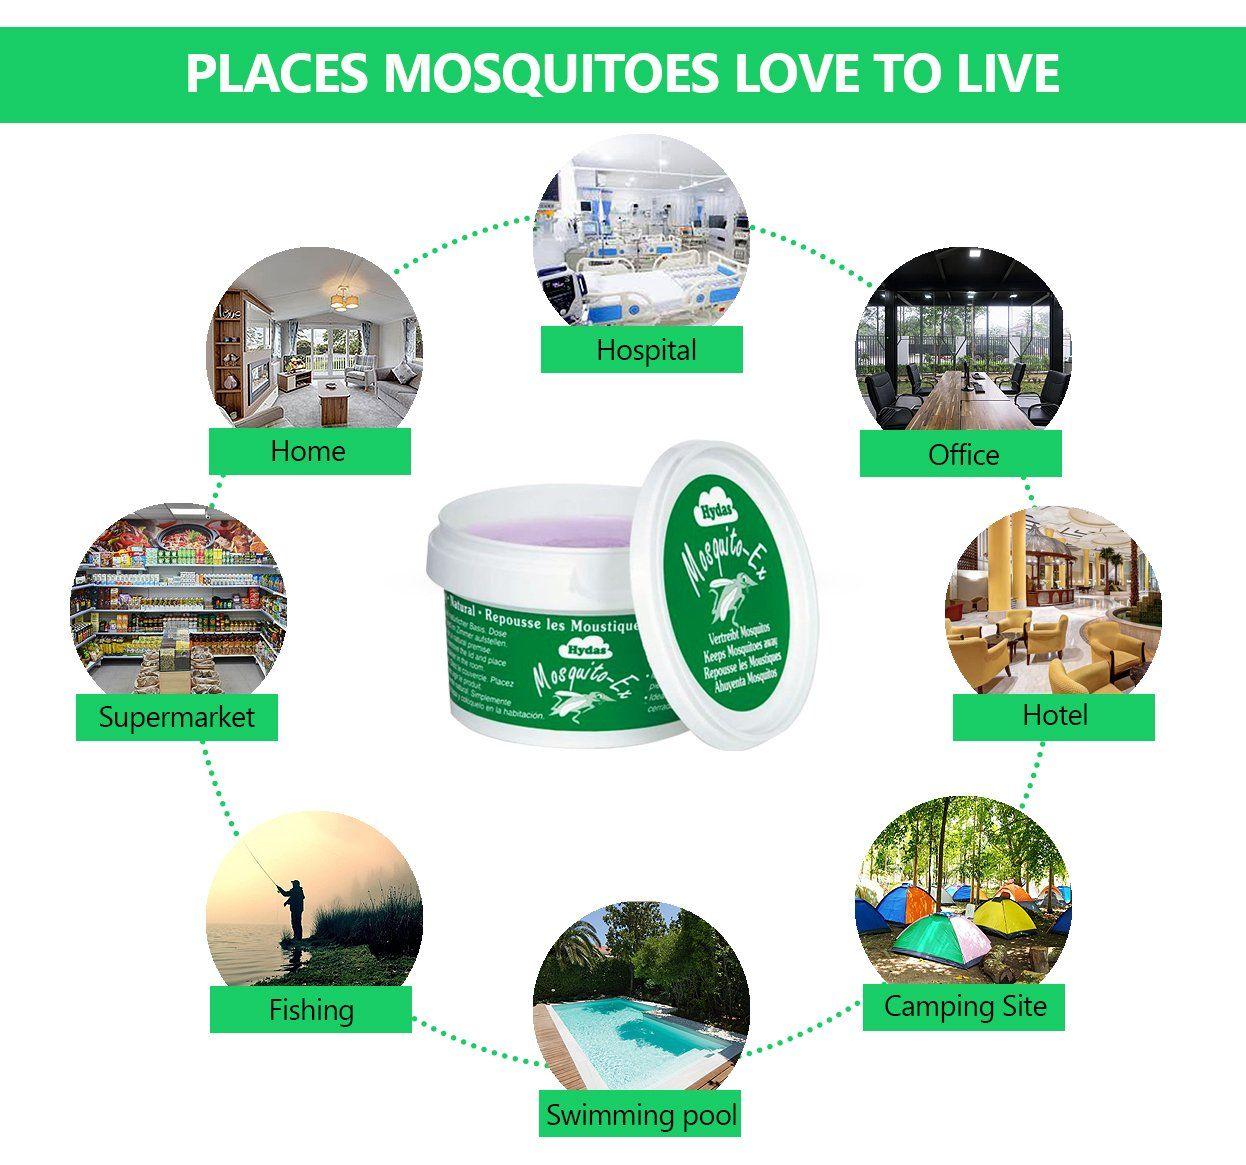 Circle of Friends H.Y.d.a.s. Logo - Amazon.com : Verseo Mosquito-Ex | Deet-Free Natural Insect Repellent ...